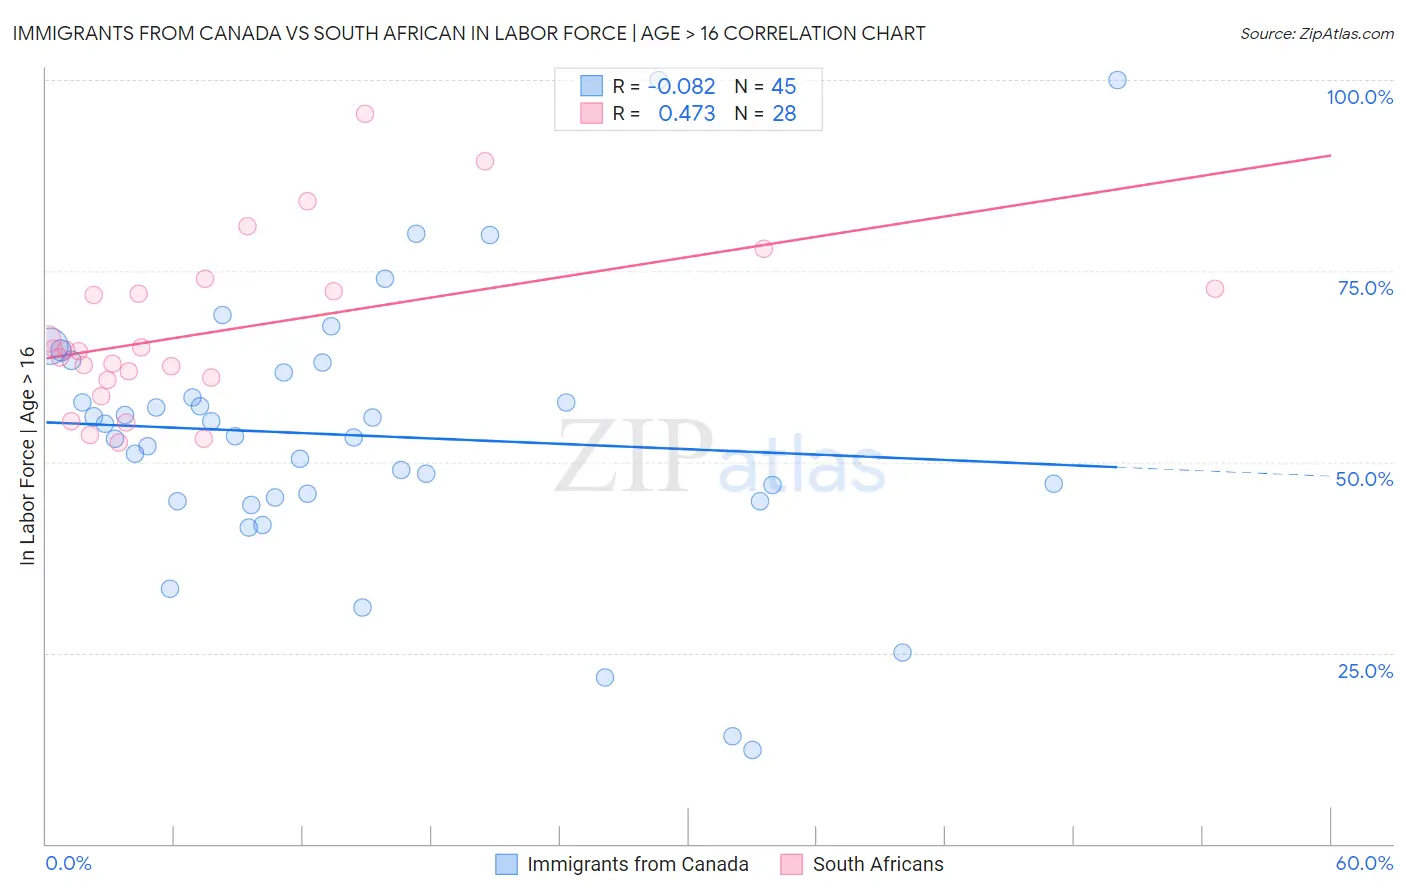 Immigrants from Canada vs South African In Labor Force | Age > 16